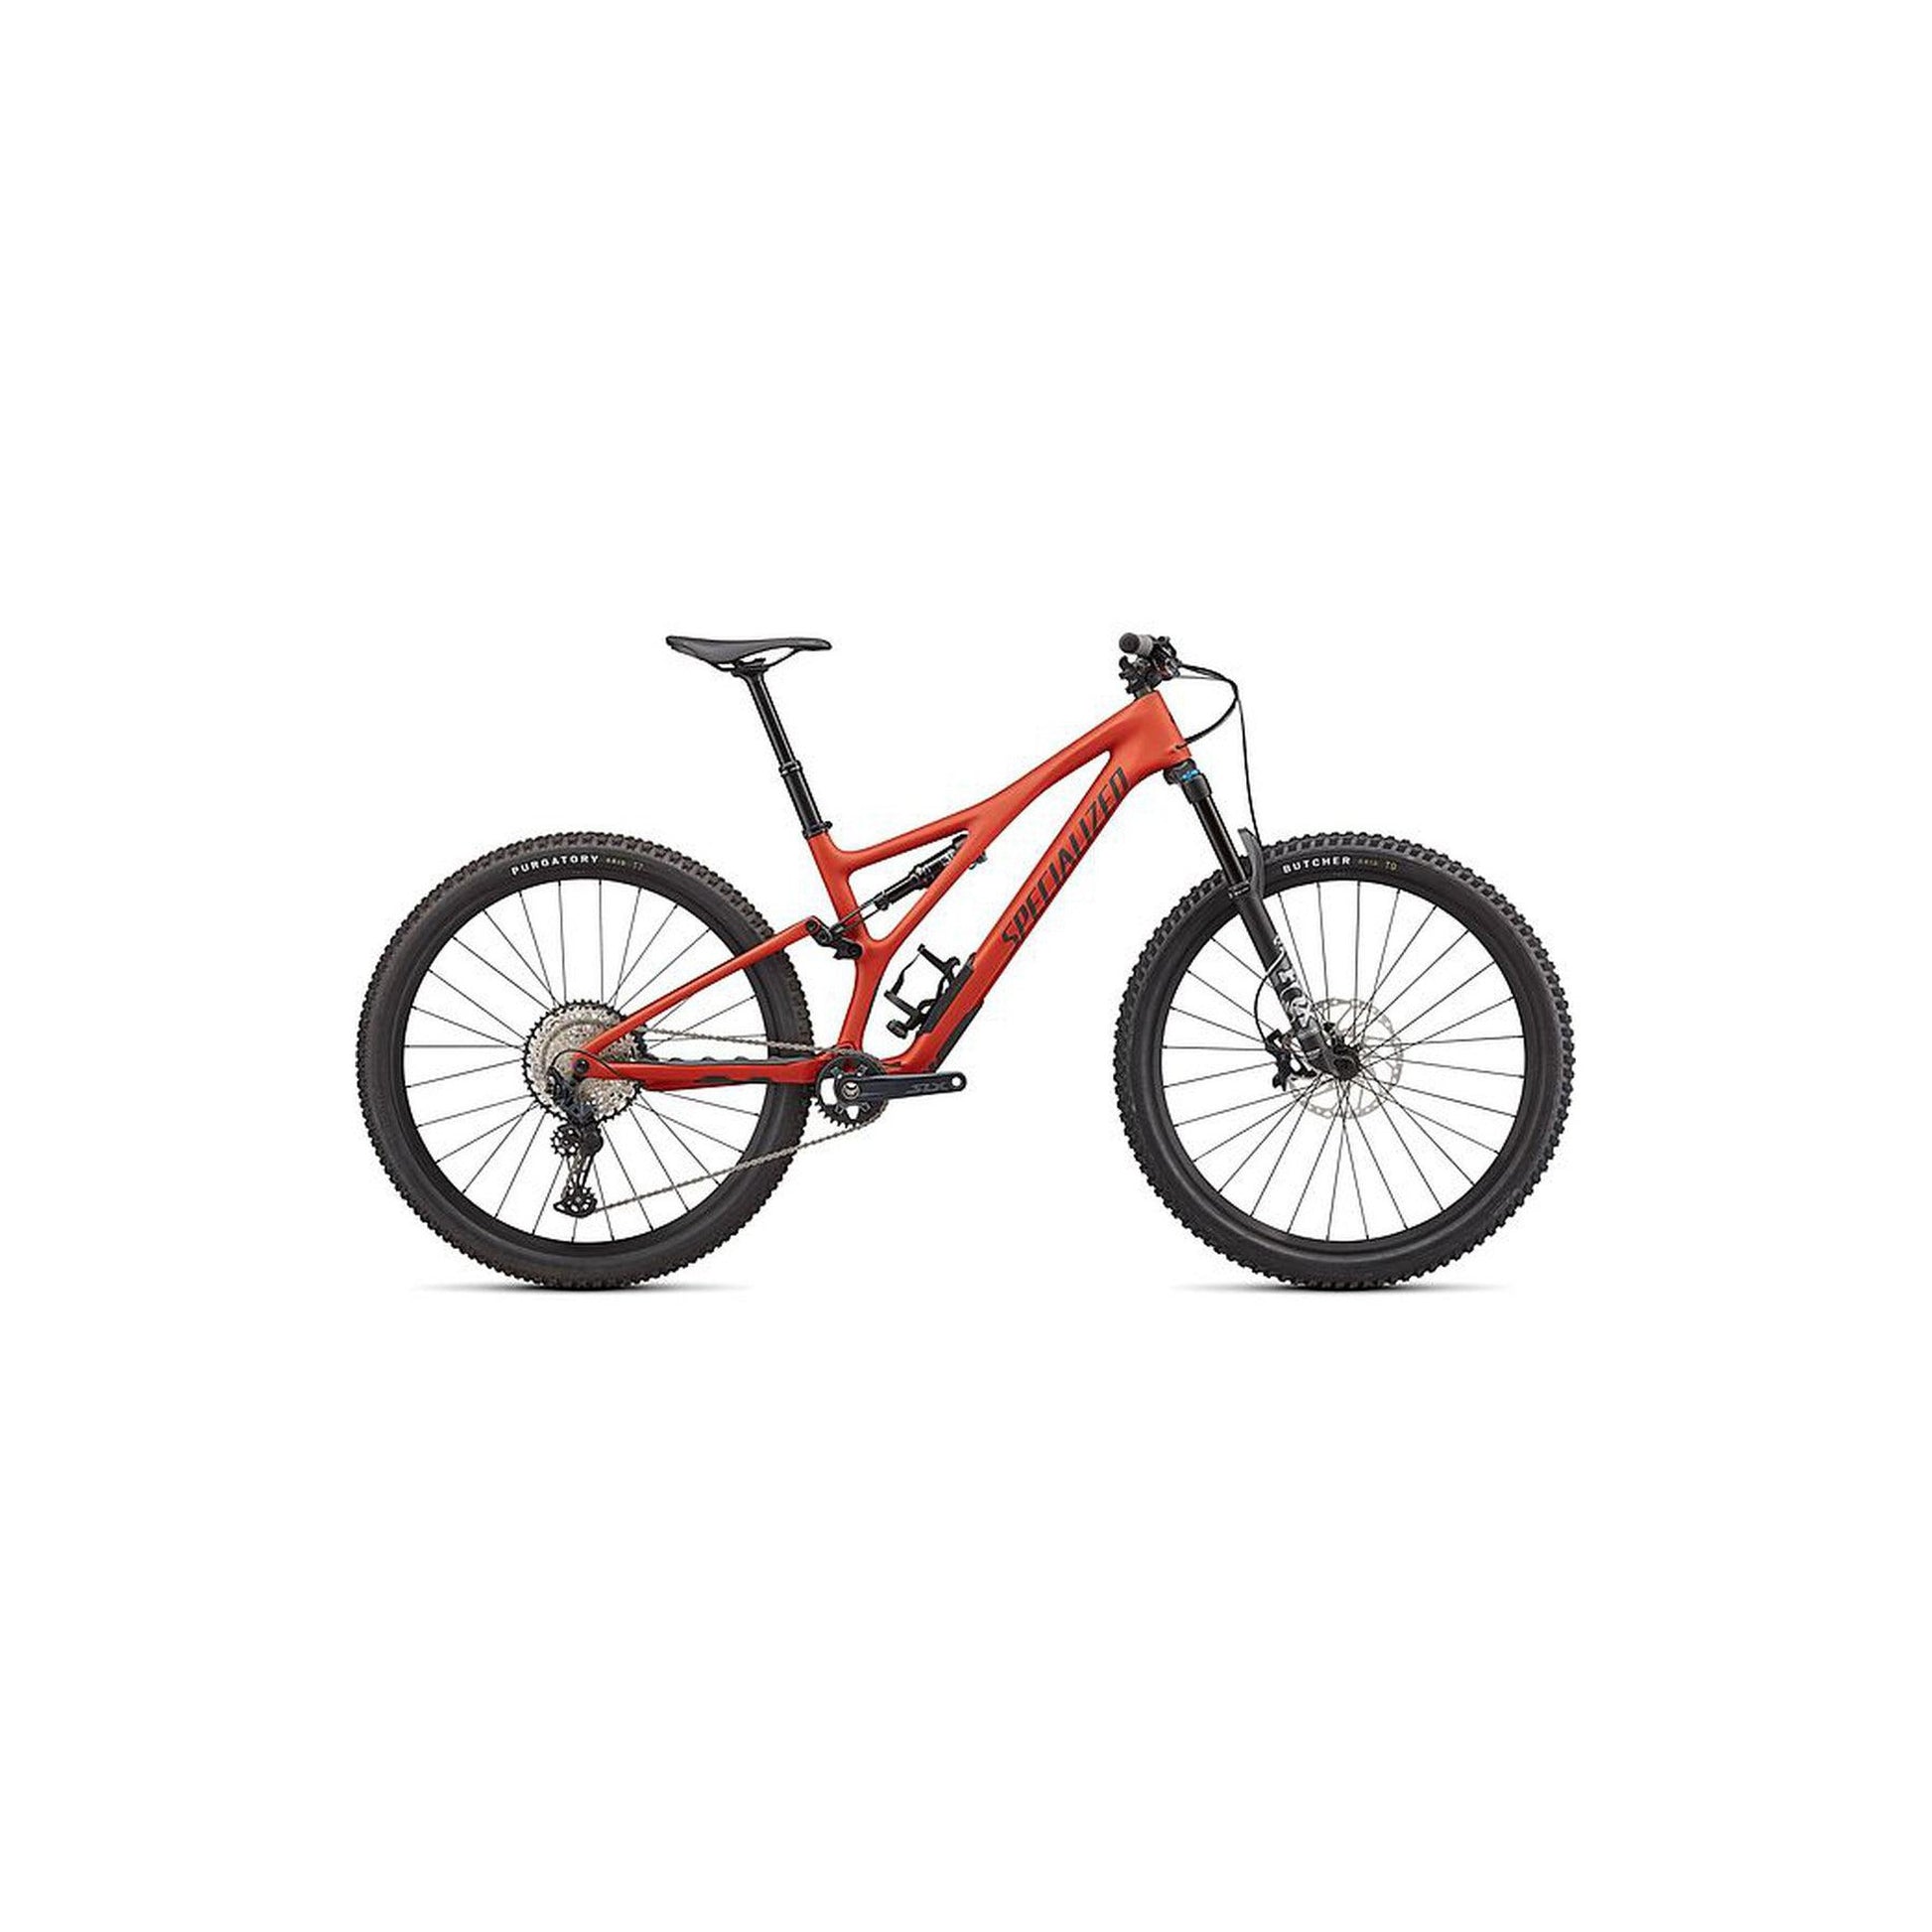 Stumpjumper Comp | completecyclist - Unrivaled suspension kinematics, sublime handling, perfectly-tuned frame stiffnessÑthe Stumpjumper Comp is our fully featured, fully affordable, full-carbon,